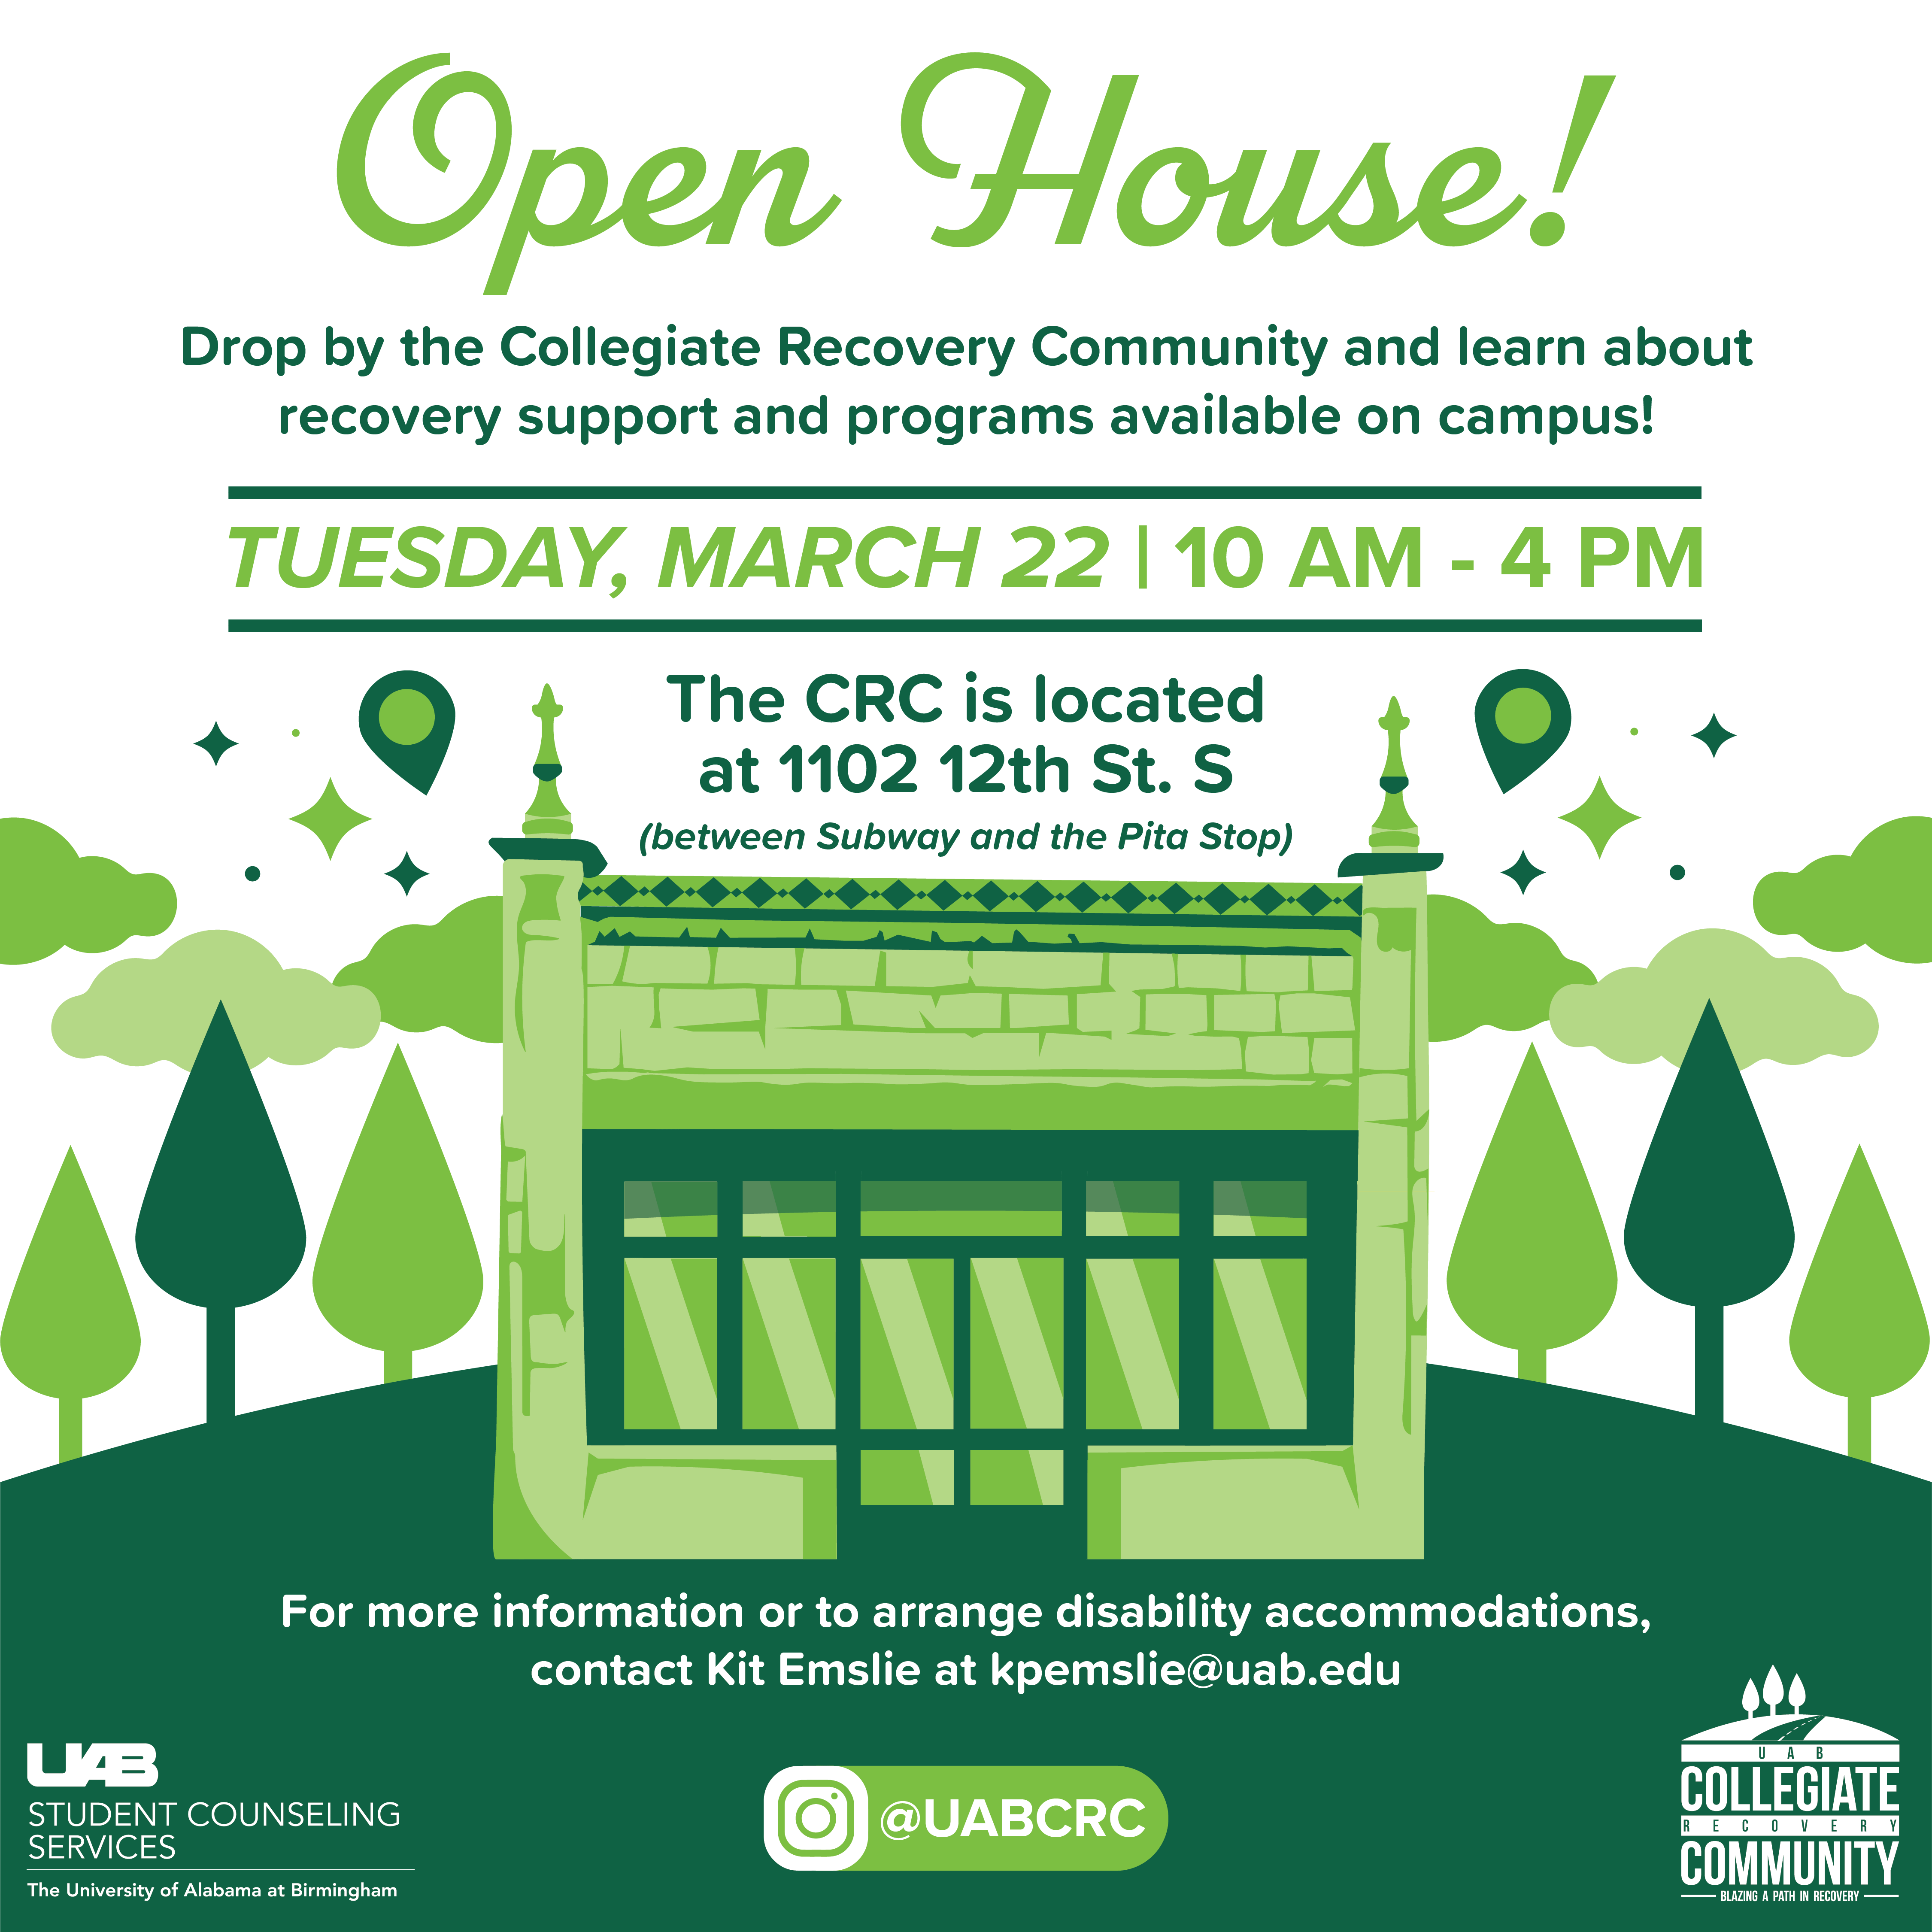 Graphic that reads, "Open House! Drop by the Collegiate Recovery Community and learn more about recovery support and programs available on campus! Tuesday March 22, 10 a.m. - 4 p.m."